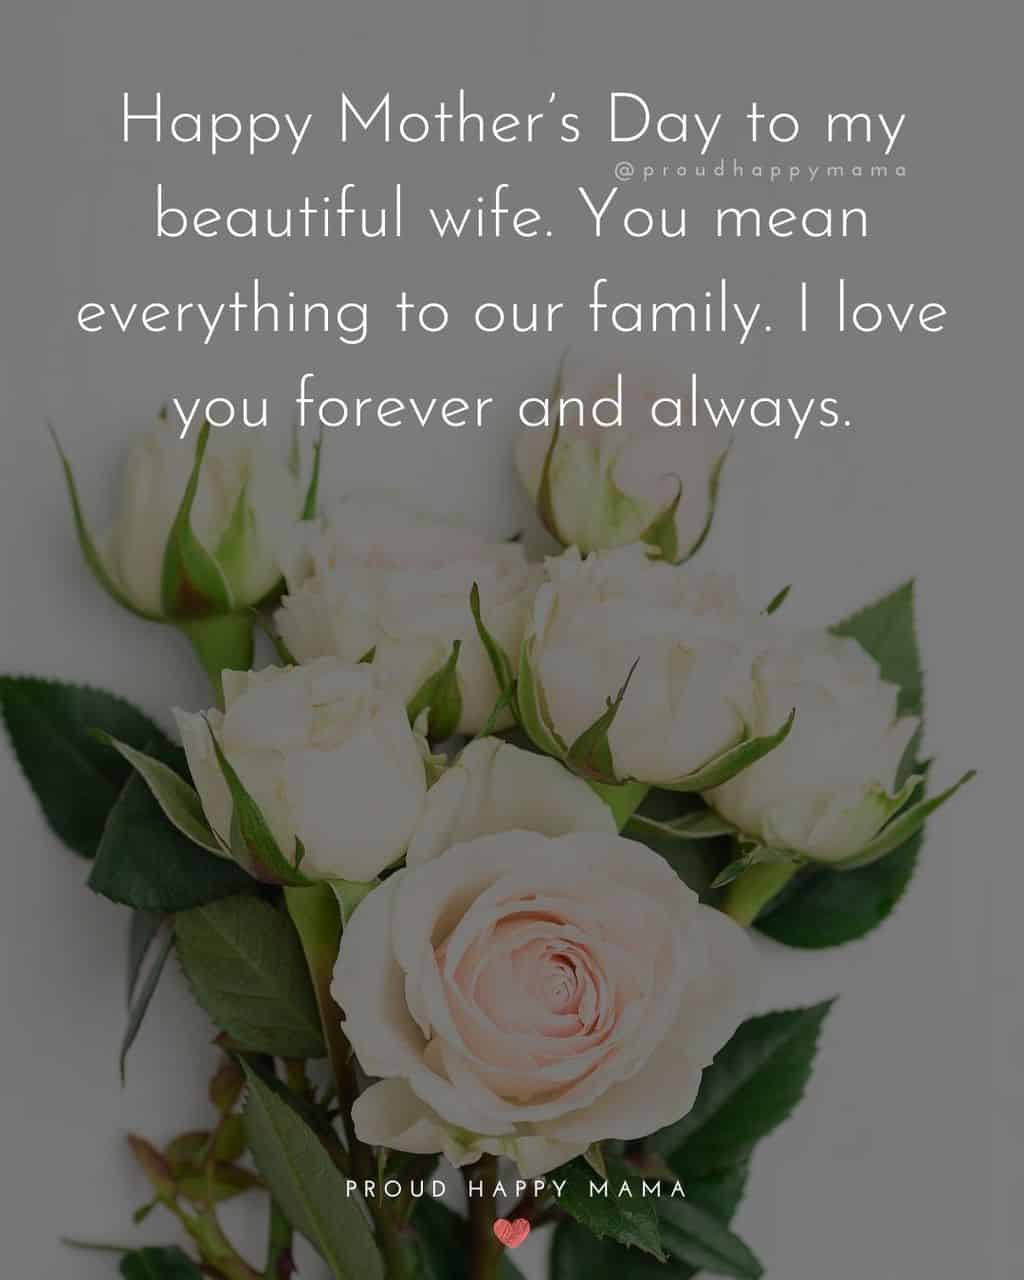 Happy Mothers Day Quotes For Wife - Happy Mother’s Day to my beautiful wife. You mean everything to our family. I love you